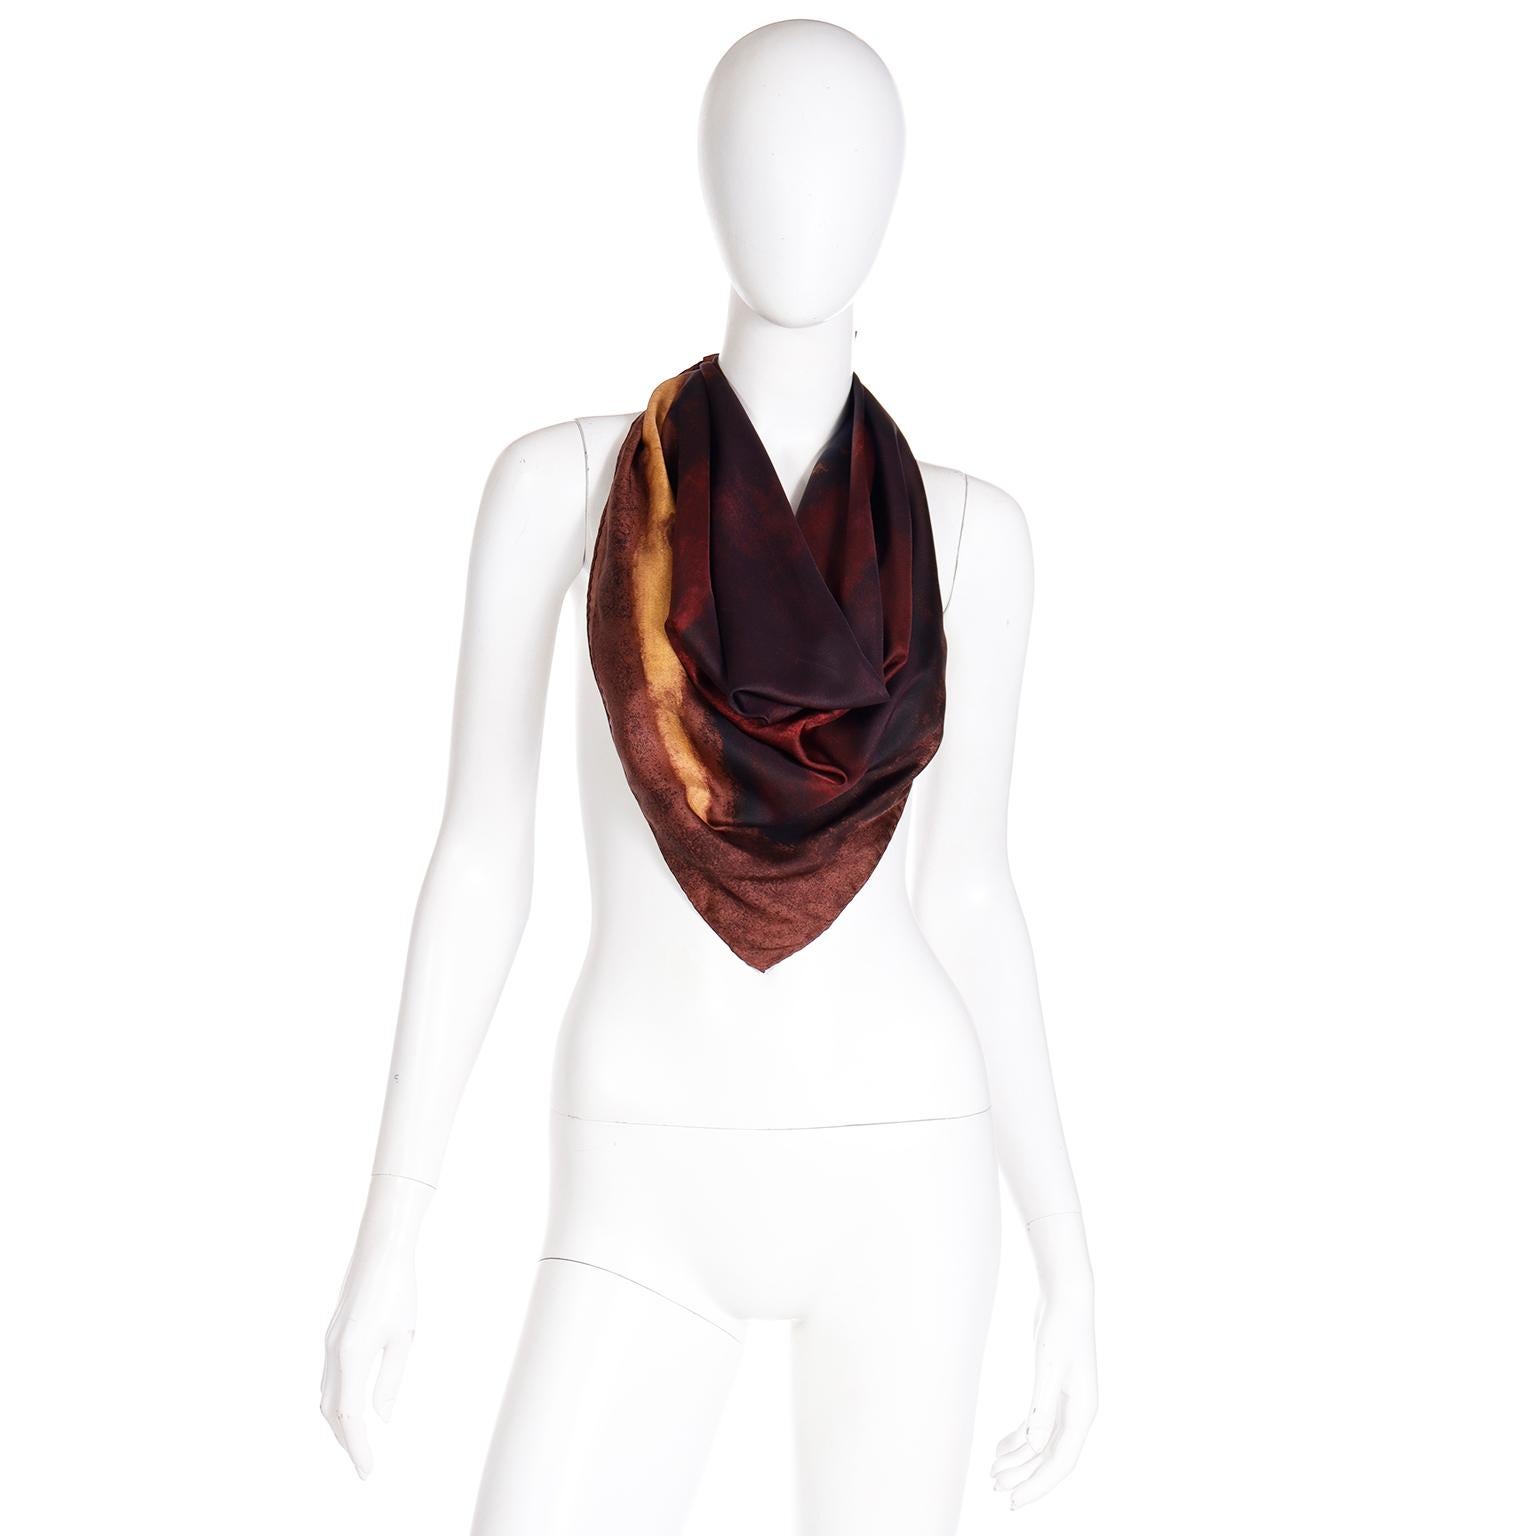 This incredible vintage Gucci silk scarf is in gorgeous watercolor shades of chocolate brown, dark brown, black, burgundy and gold. The front features a large center 